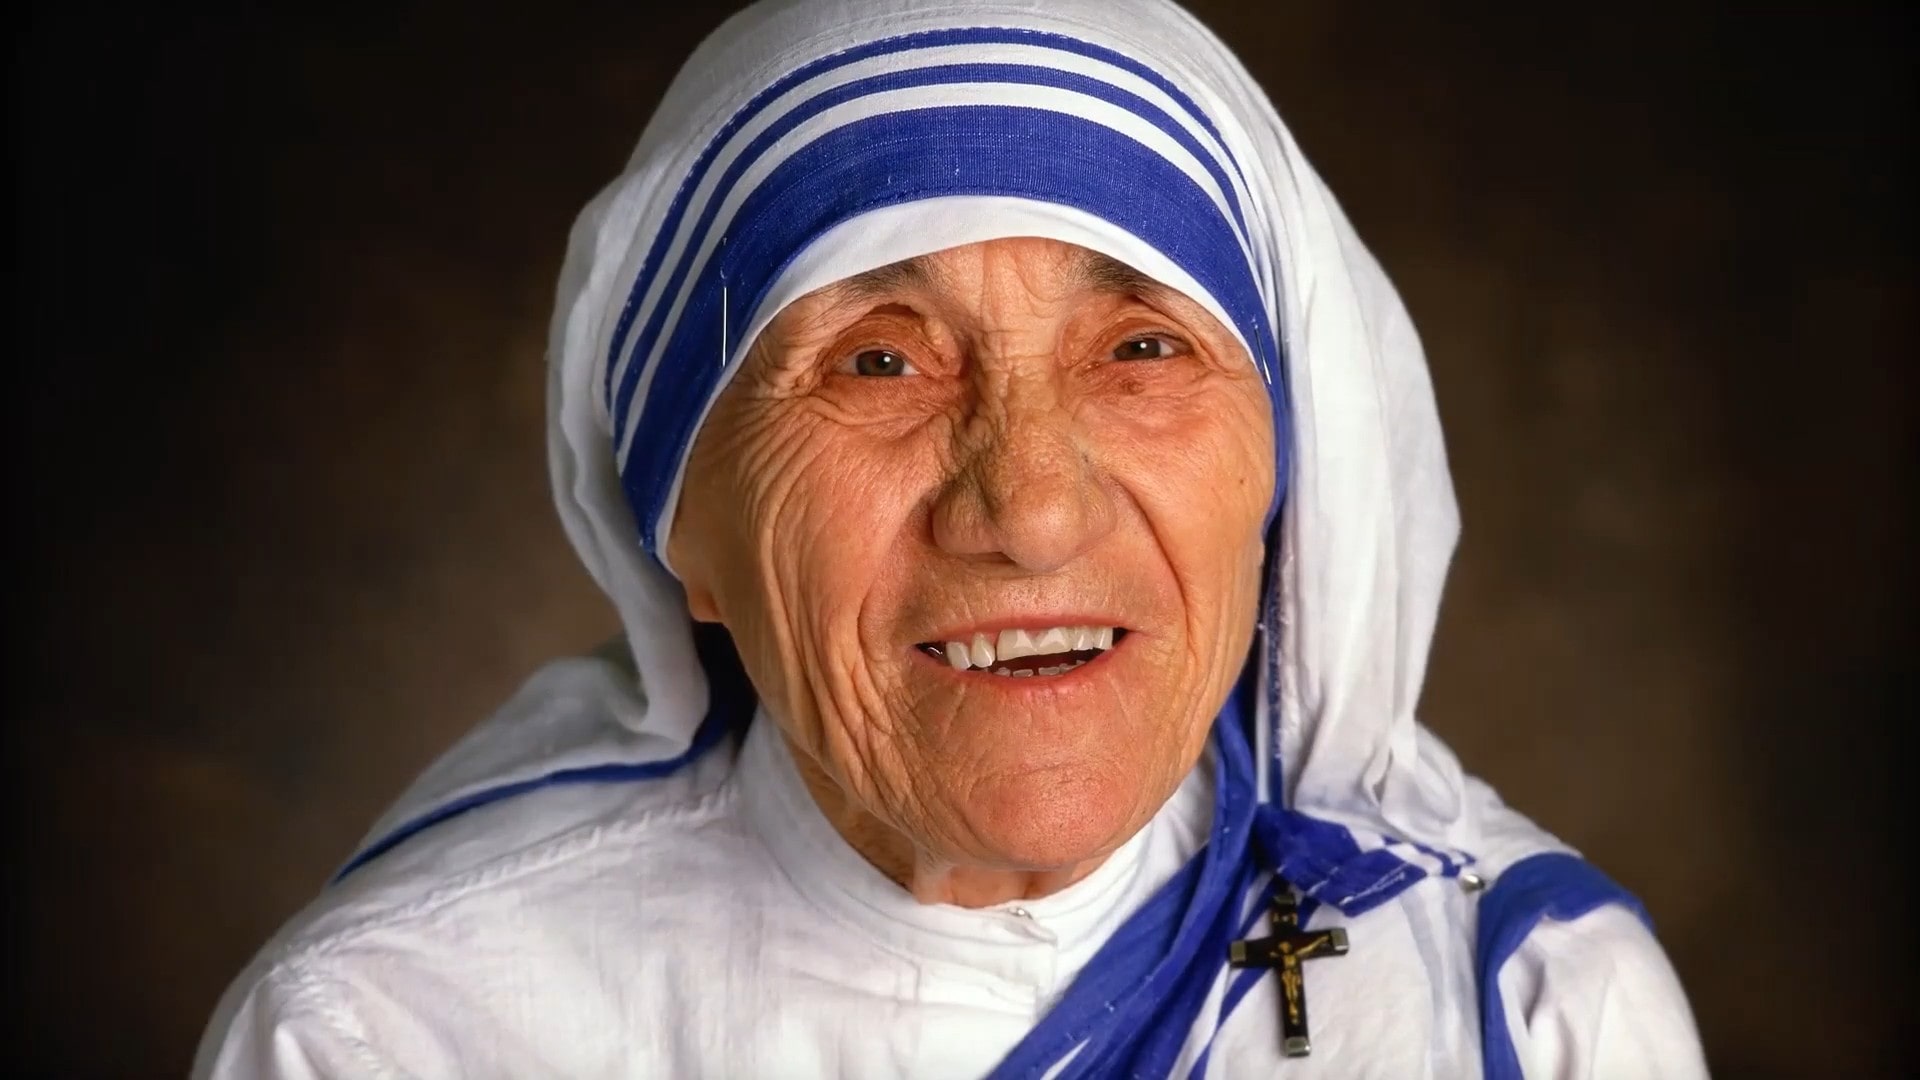 Our mission came from the words of Mother Teresa, “The greatest disease in the West today is not TB or leprosy; it is being unwanted, unloved, and uncared for. 